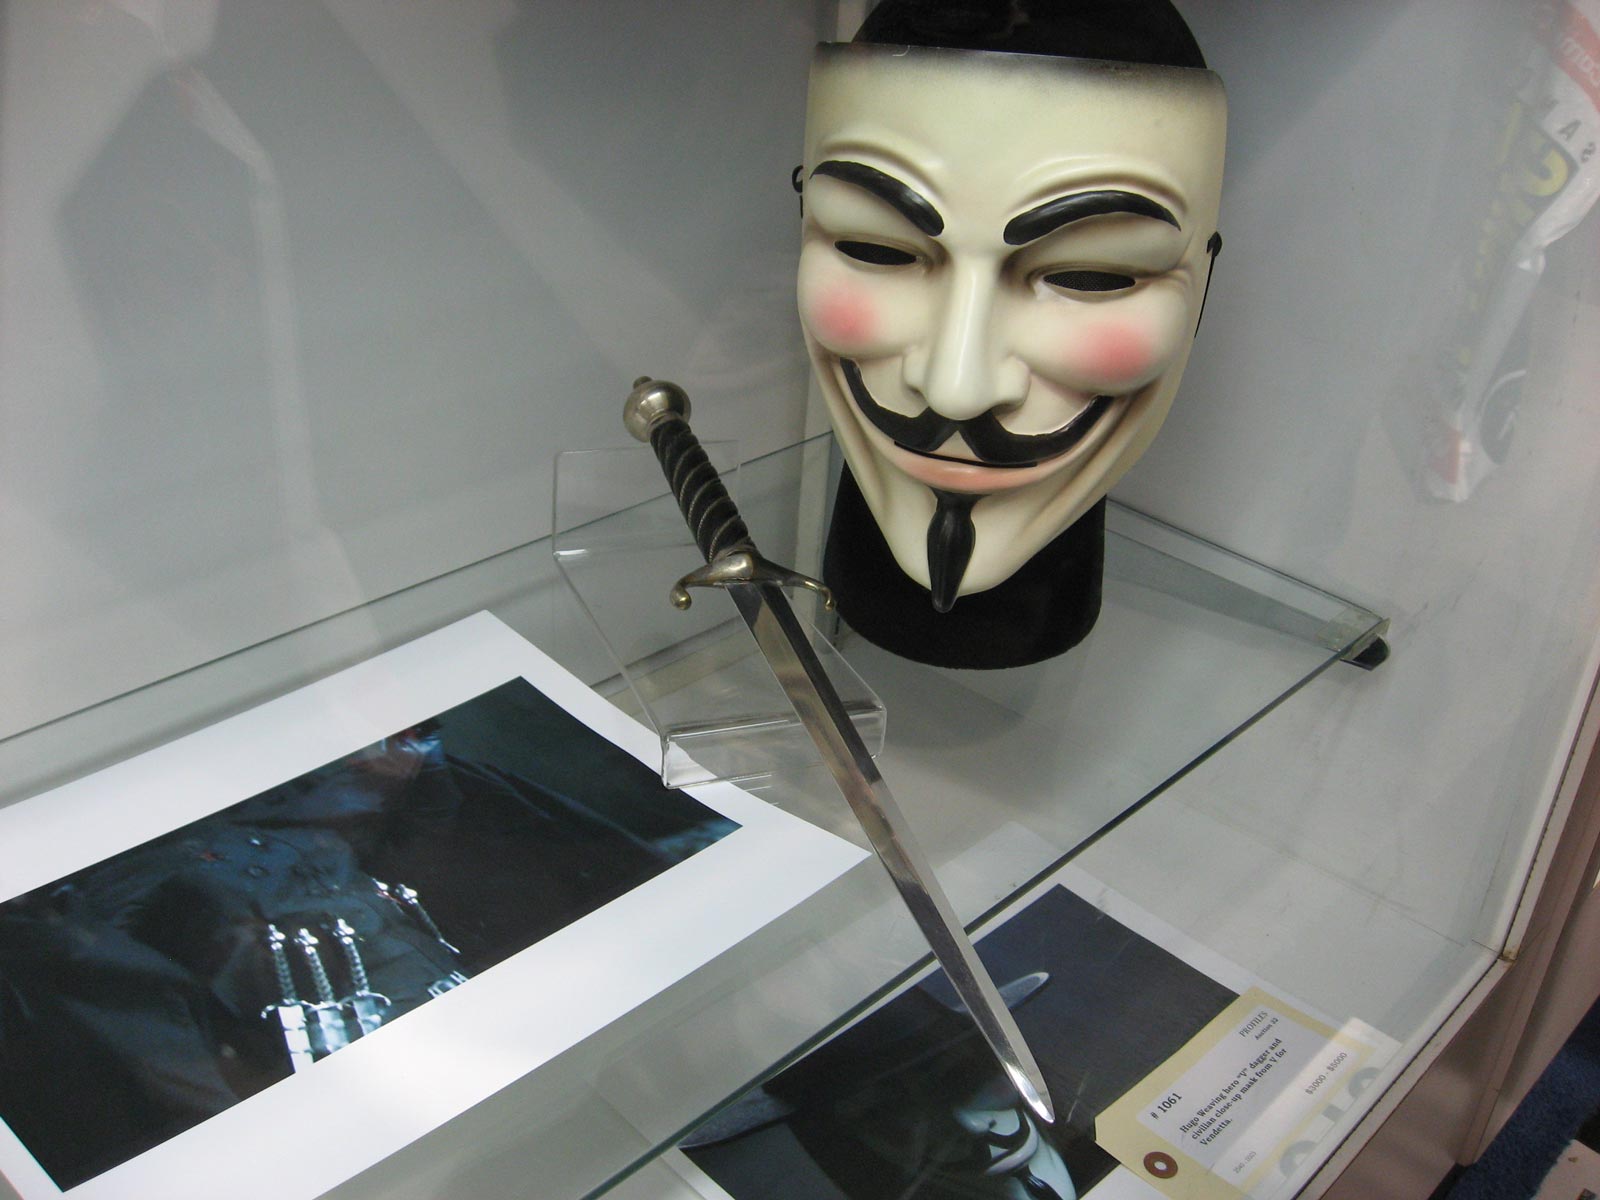 profiles-in-history-auction-comic-con-2008-san-diego-v-for-vendetta-mask-knife-hr.jpg